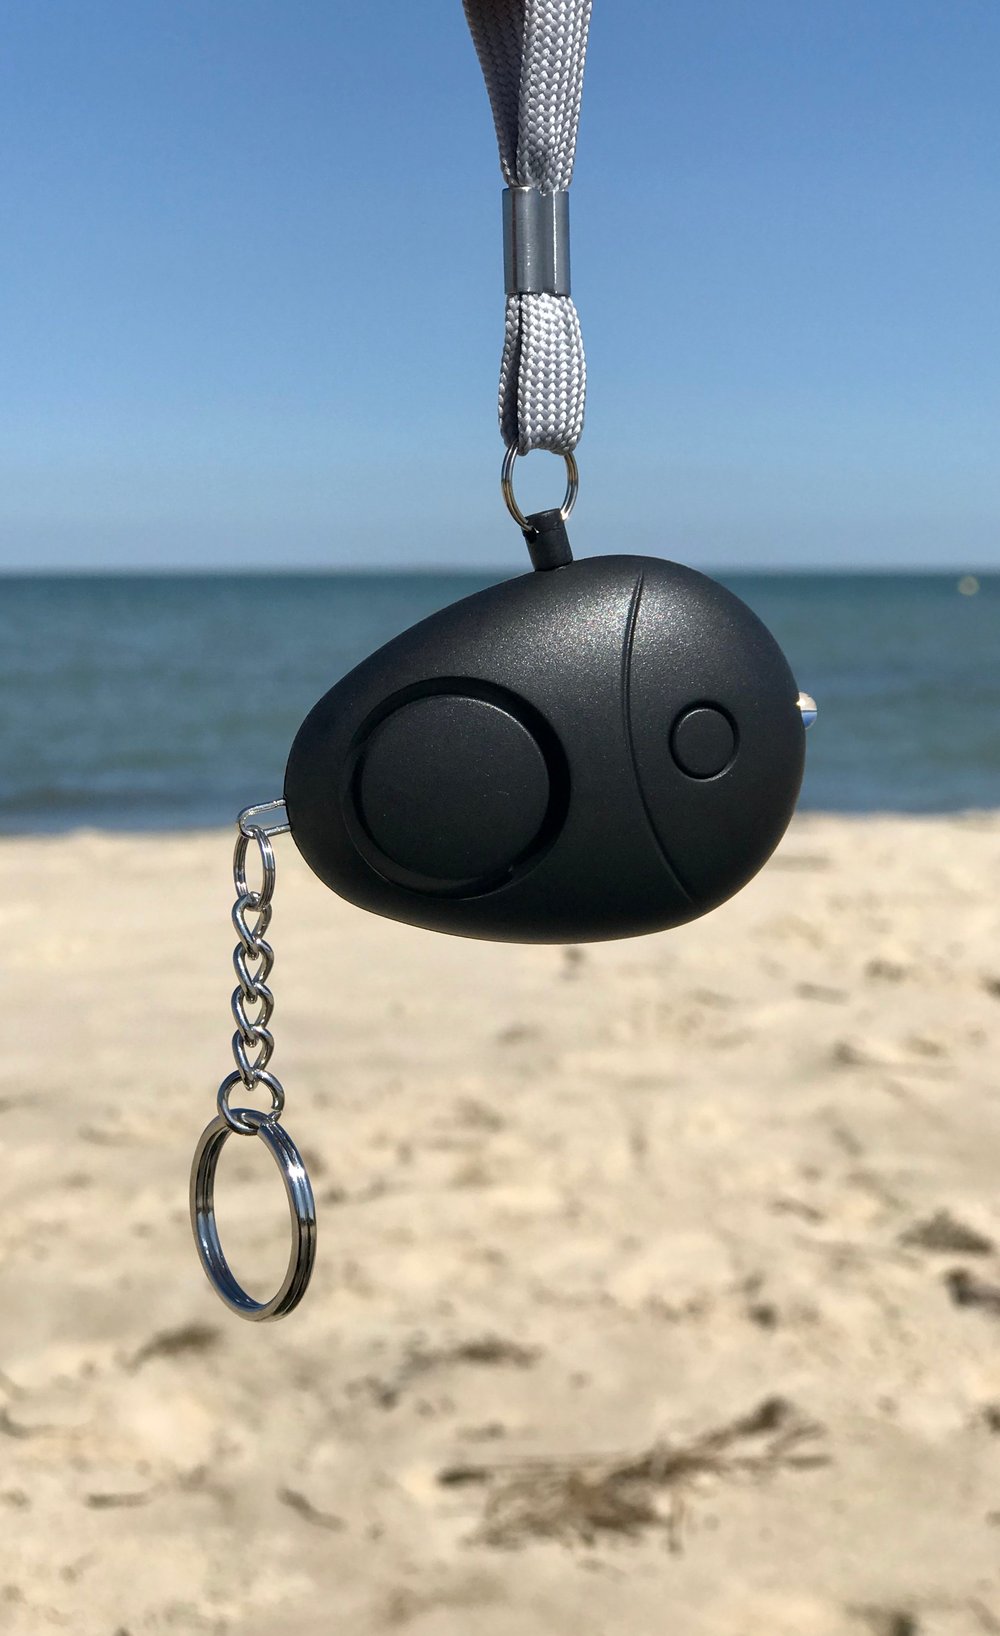 Image of Personal Alarm Keychain